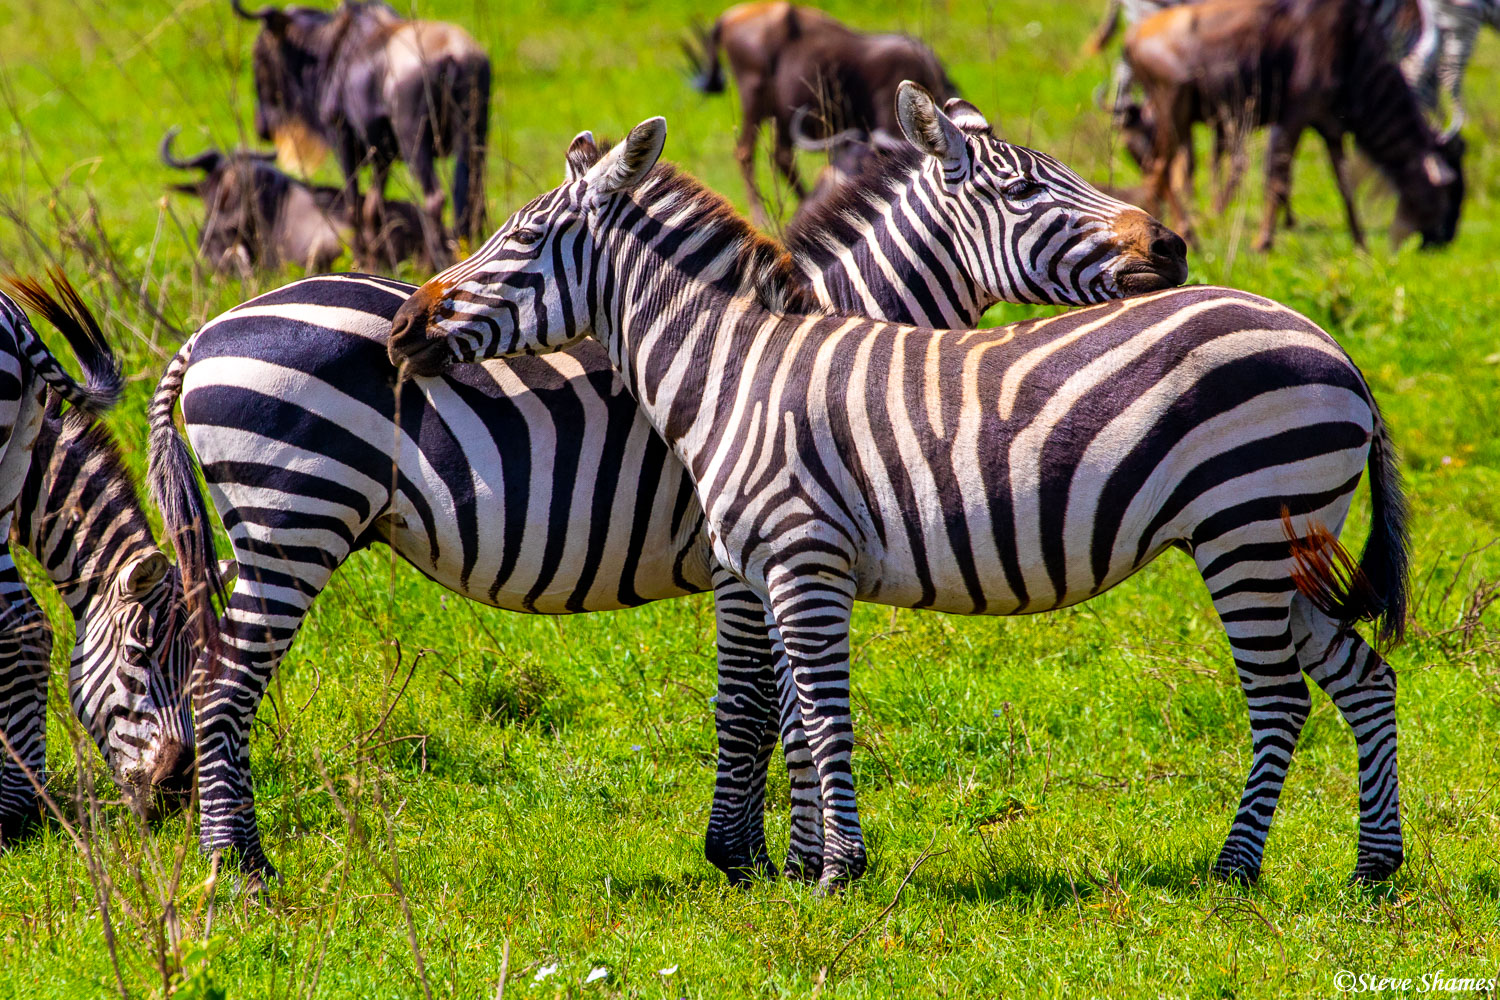 Zebras take on this pose quite a bit. It might be so each one is on the lookout for danger in each direction.